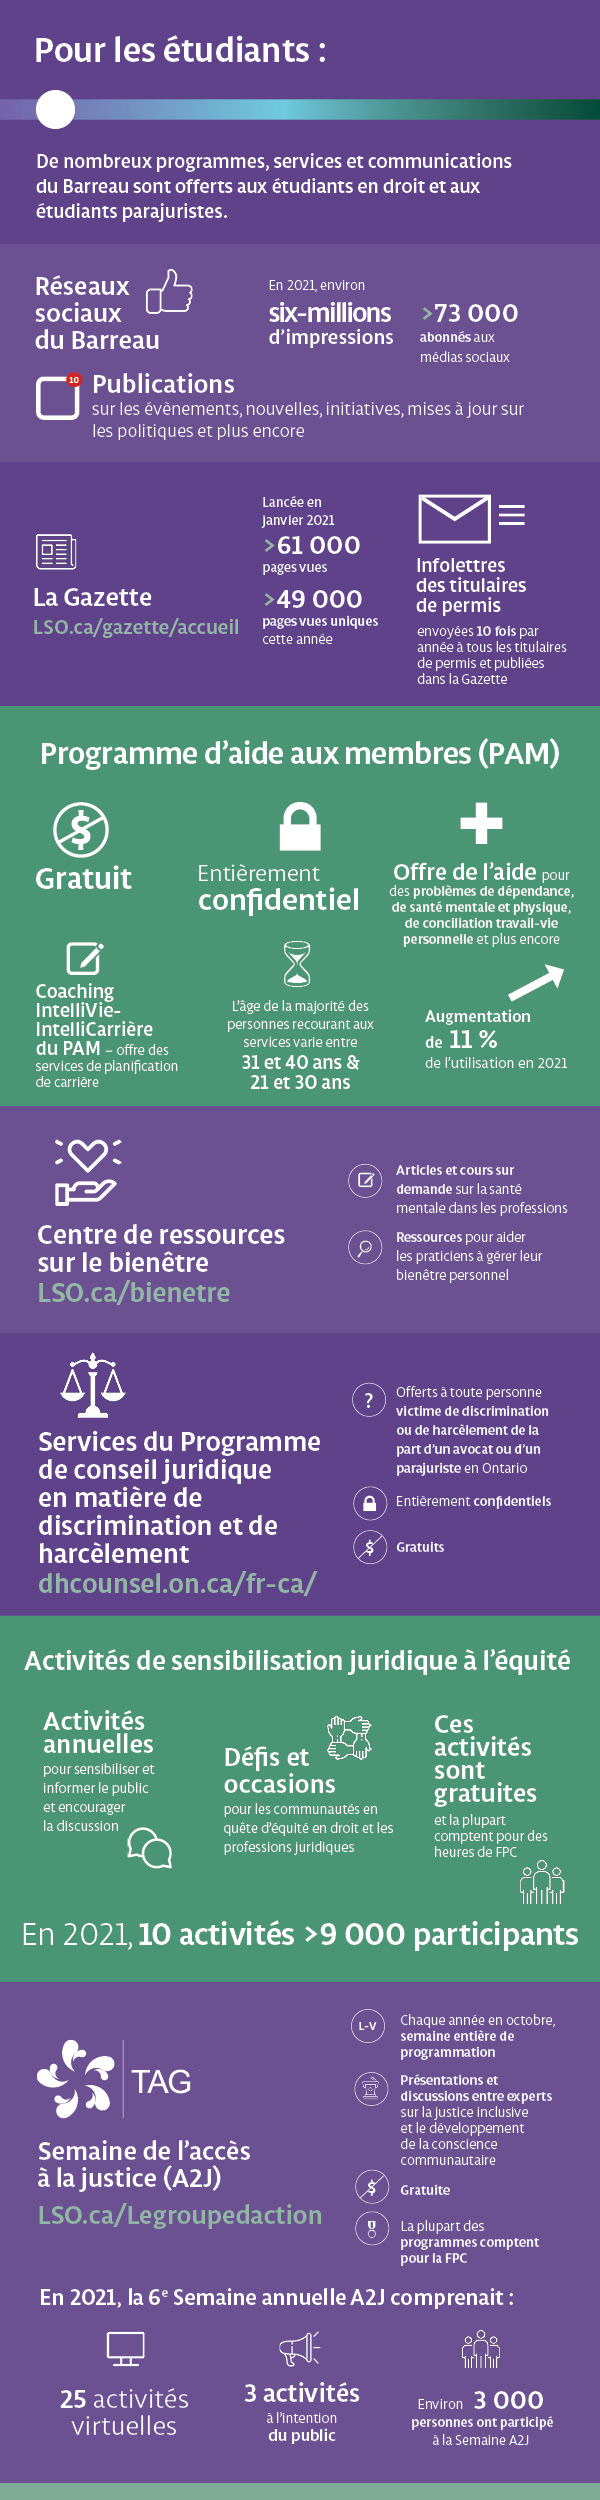 Annual Report Infographic - Students - FR